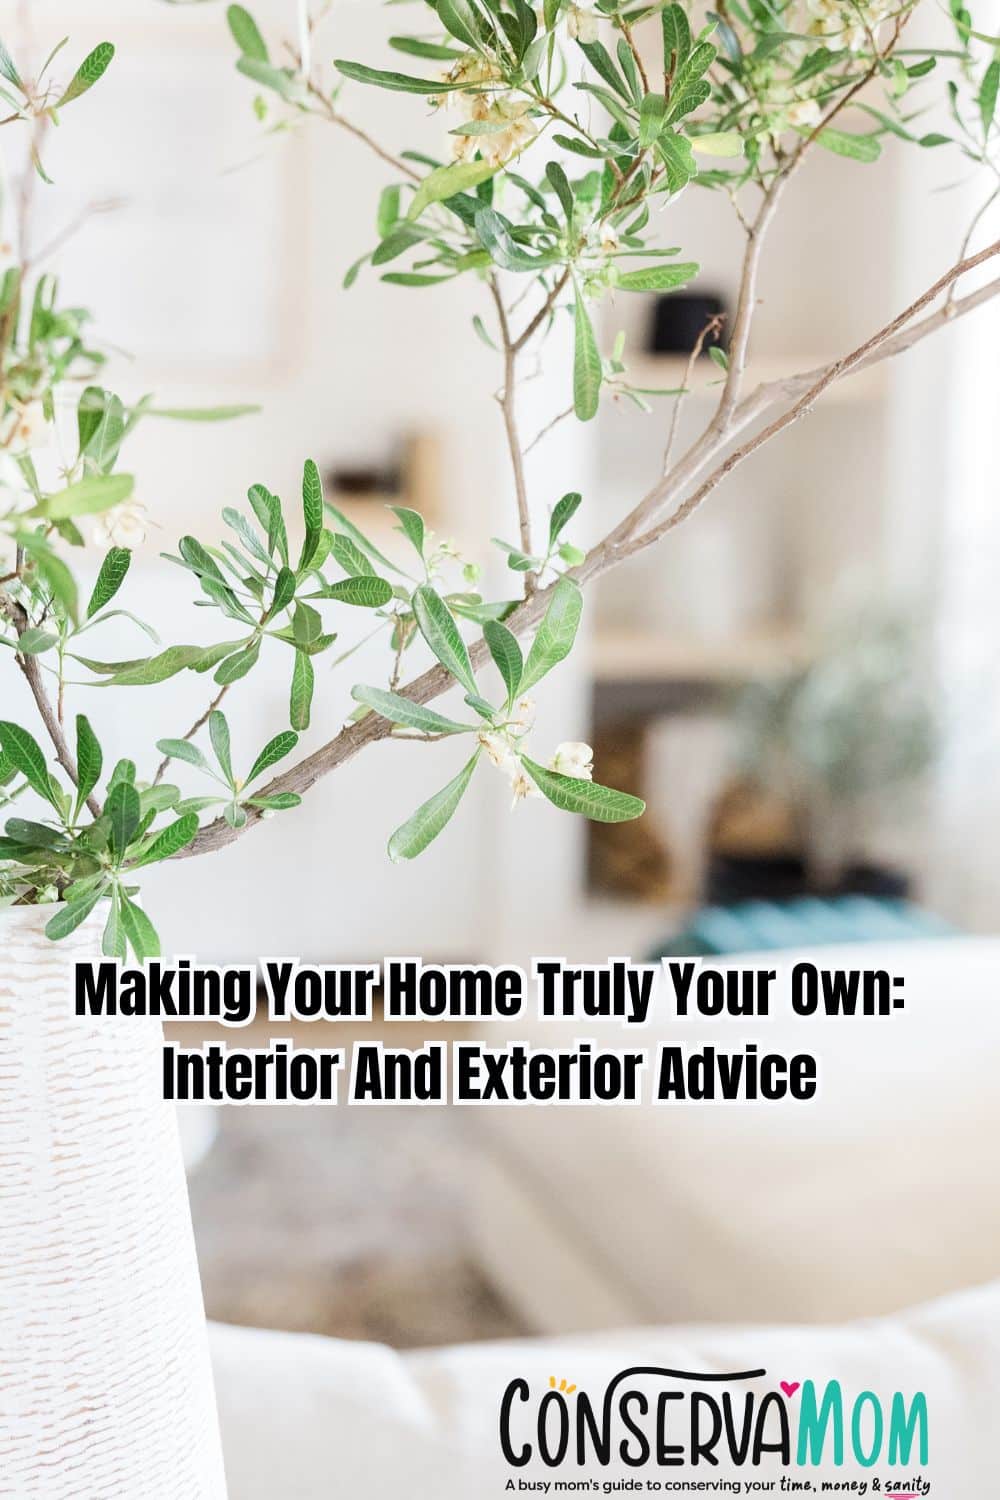 MAking your home truly your own